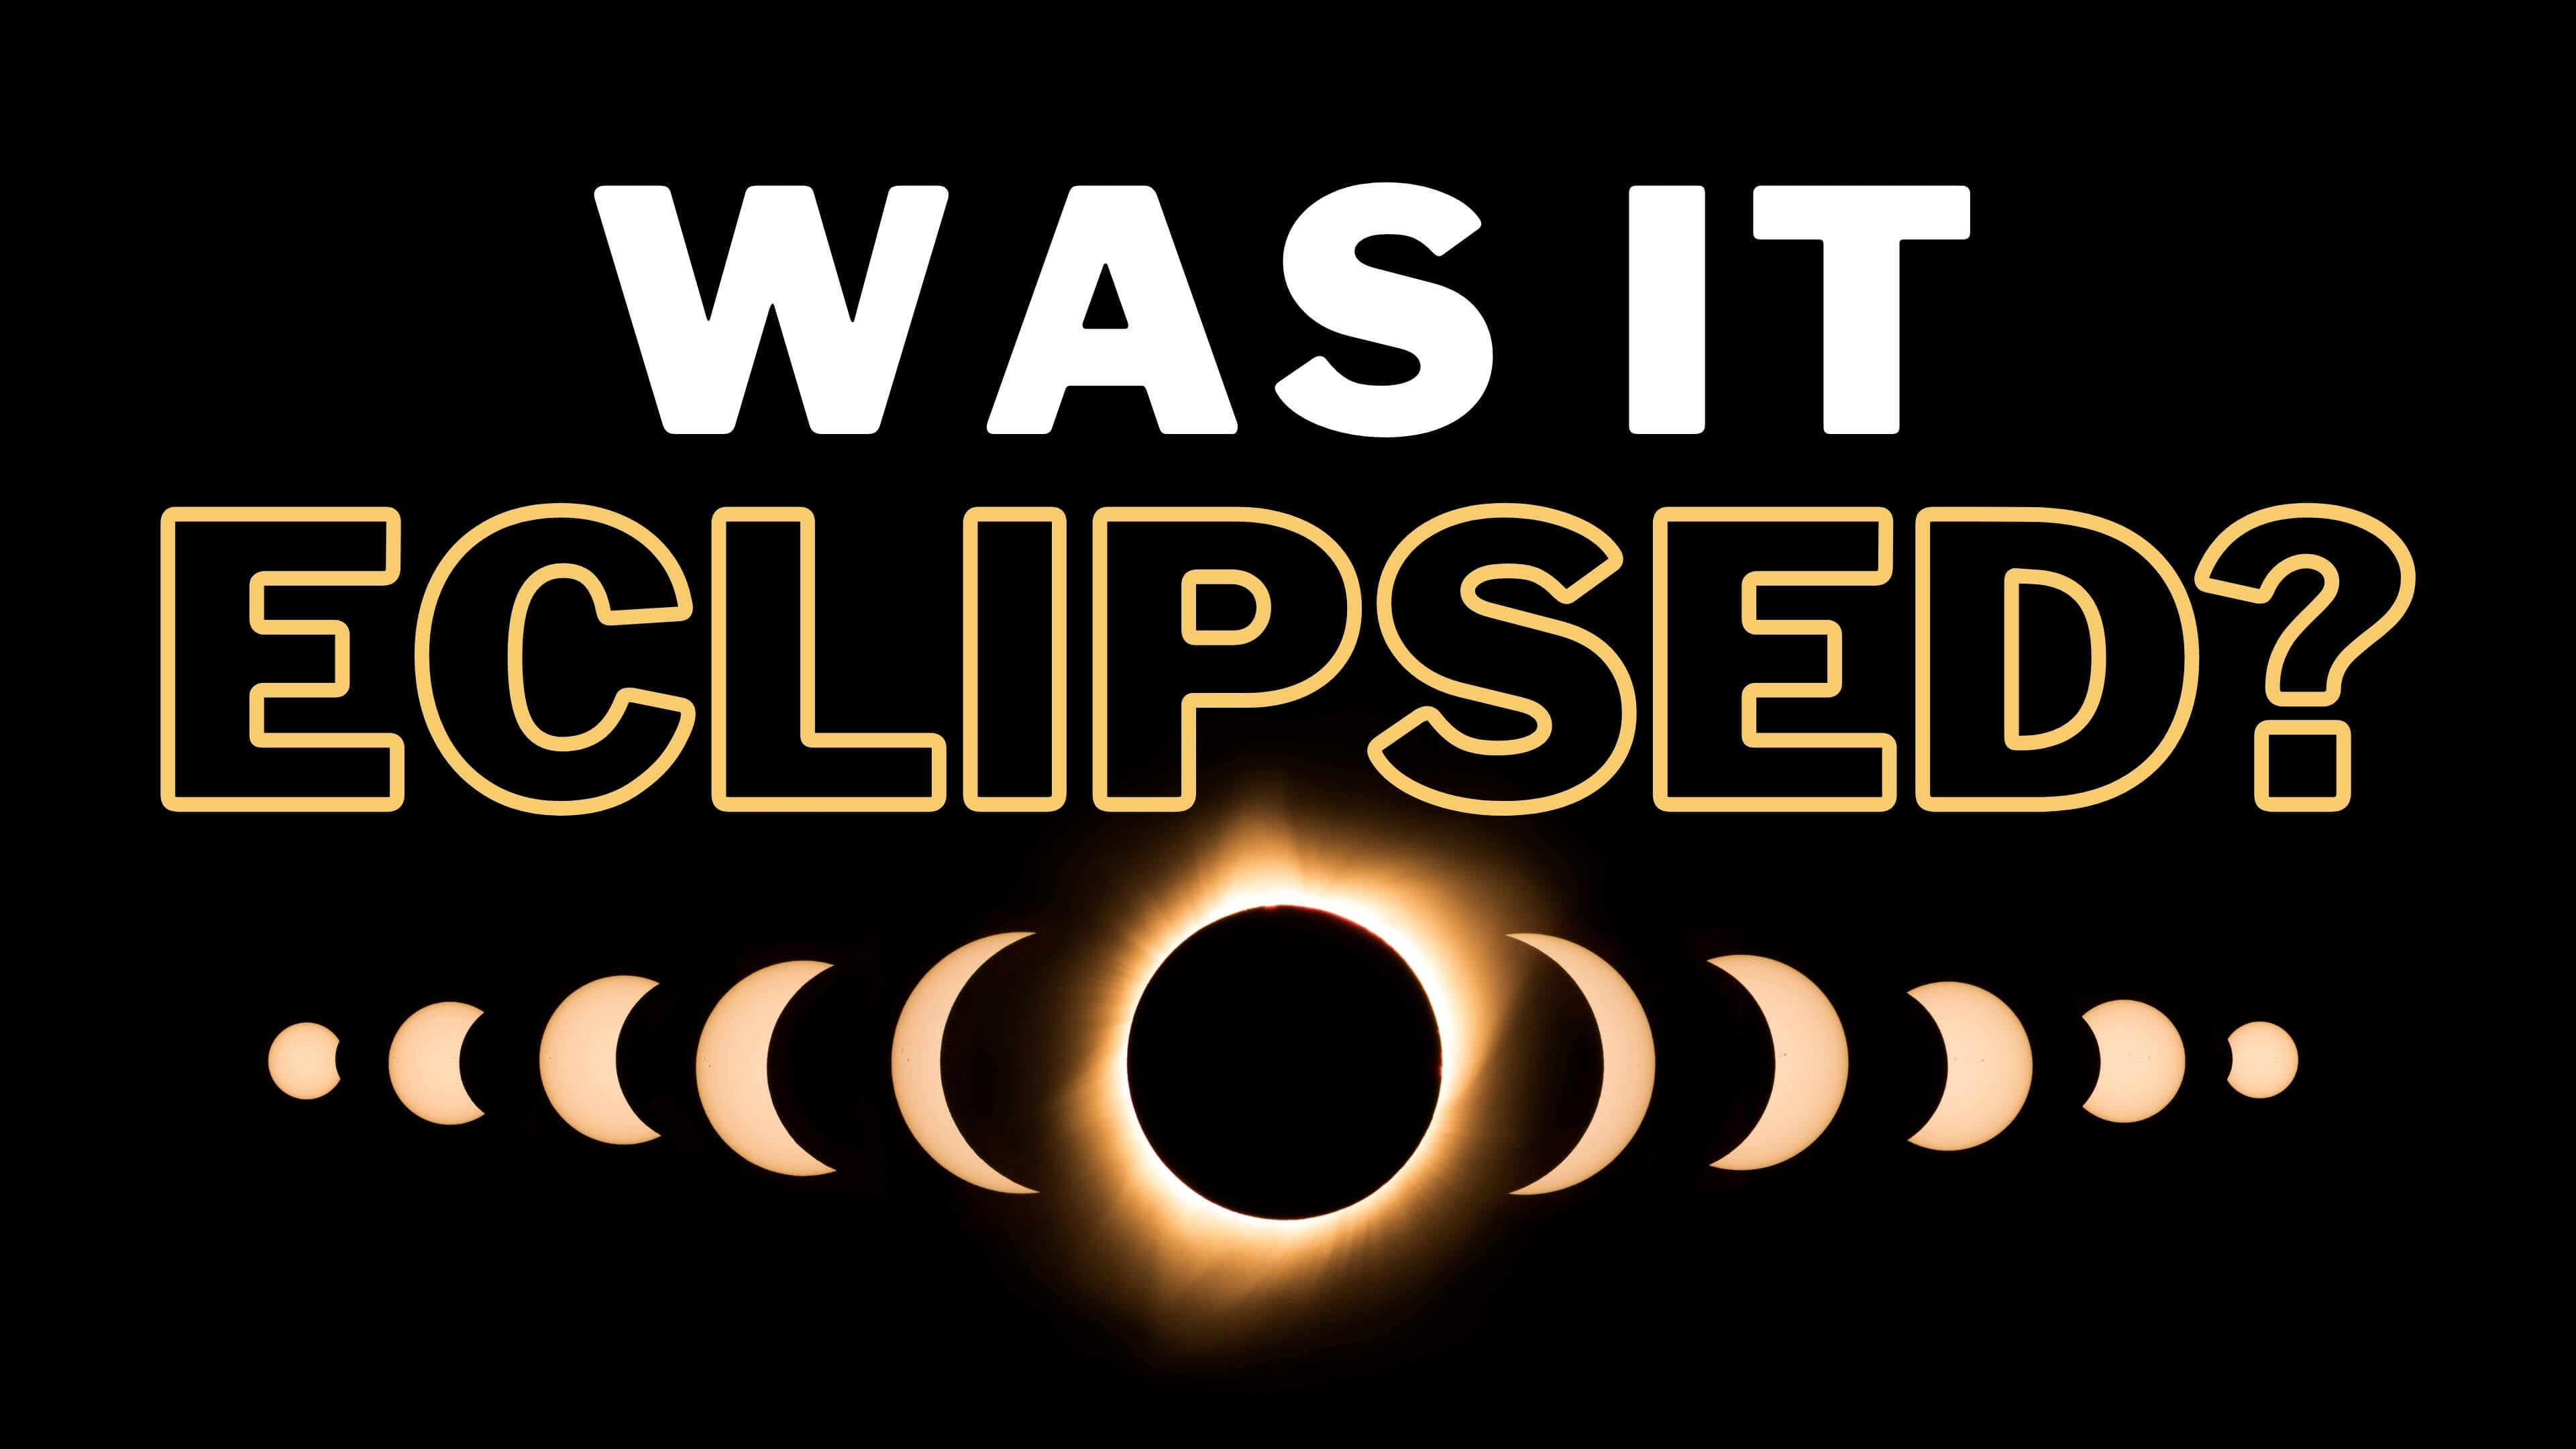 Was It Eclipsed?